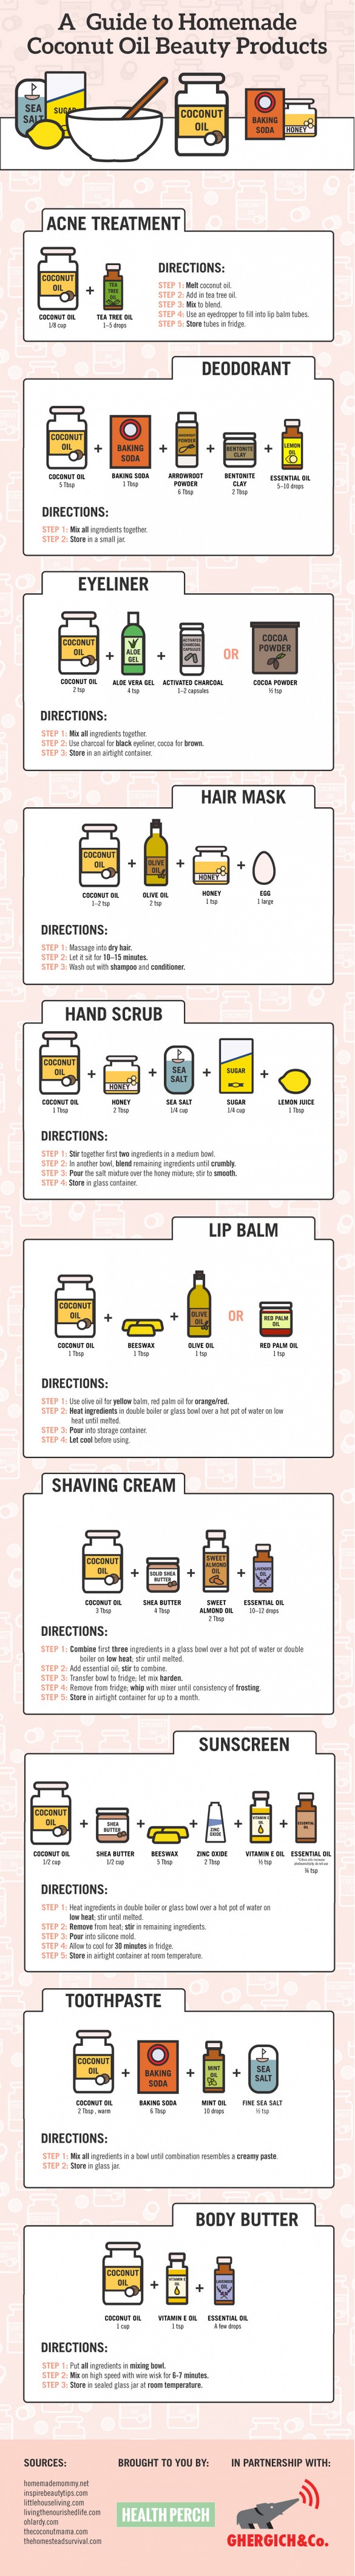 DIY Coconut oil beauty products